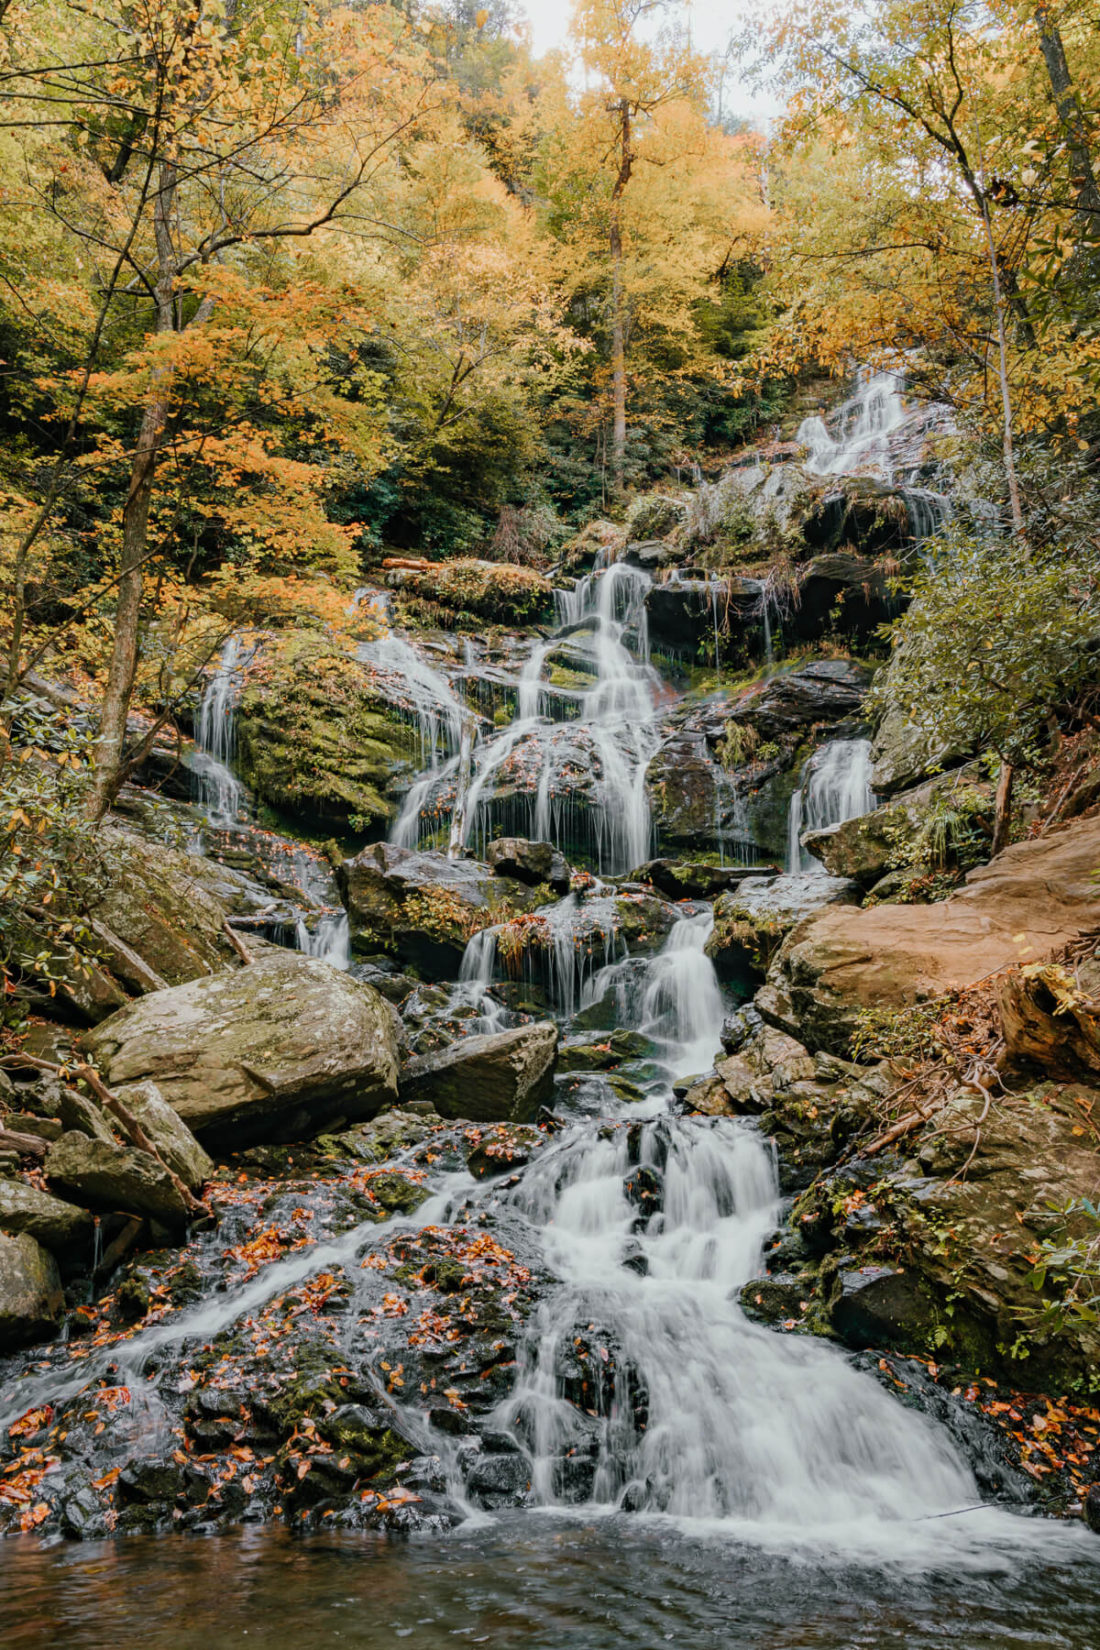 Fall foliage surrounding Lower Catawba Falls in Old Fort, NC